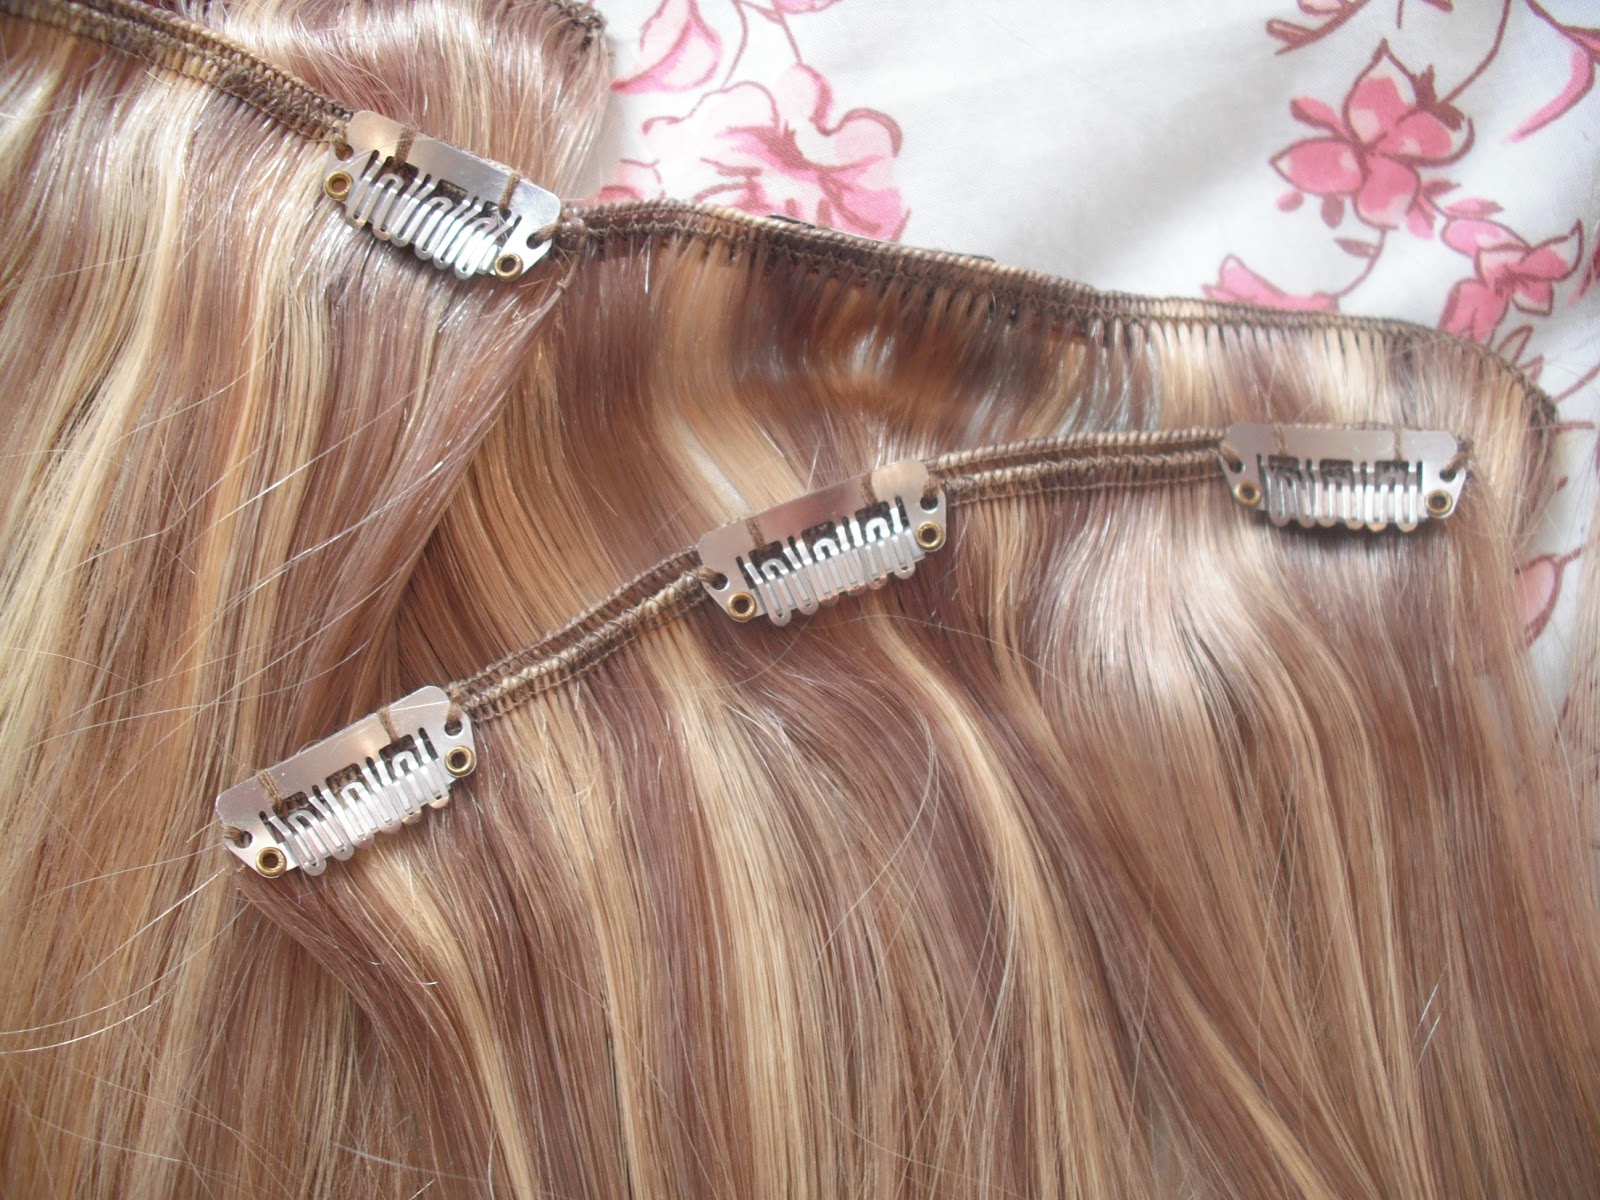 Clip in blue hair extensions - wide 8